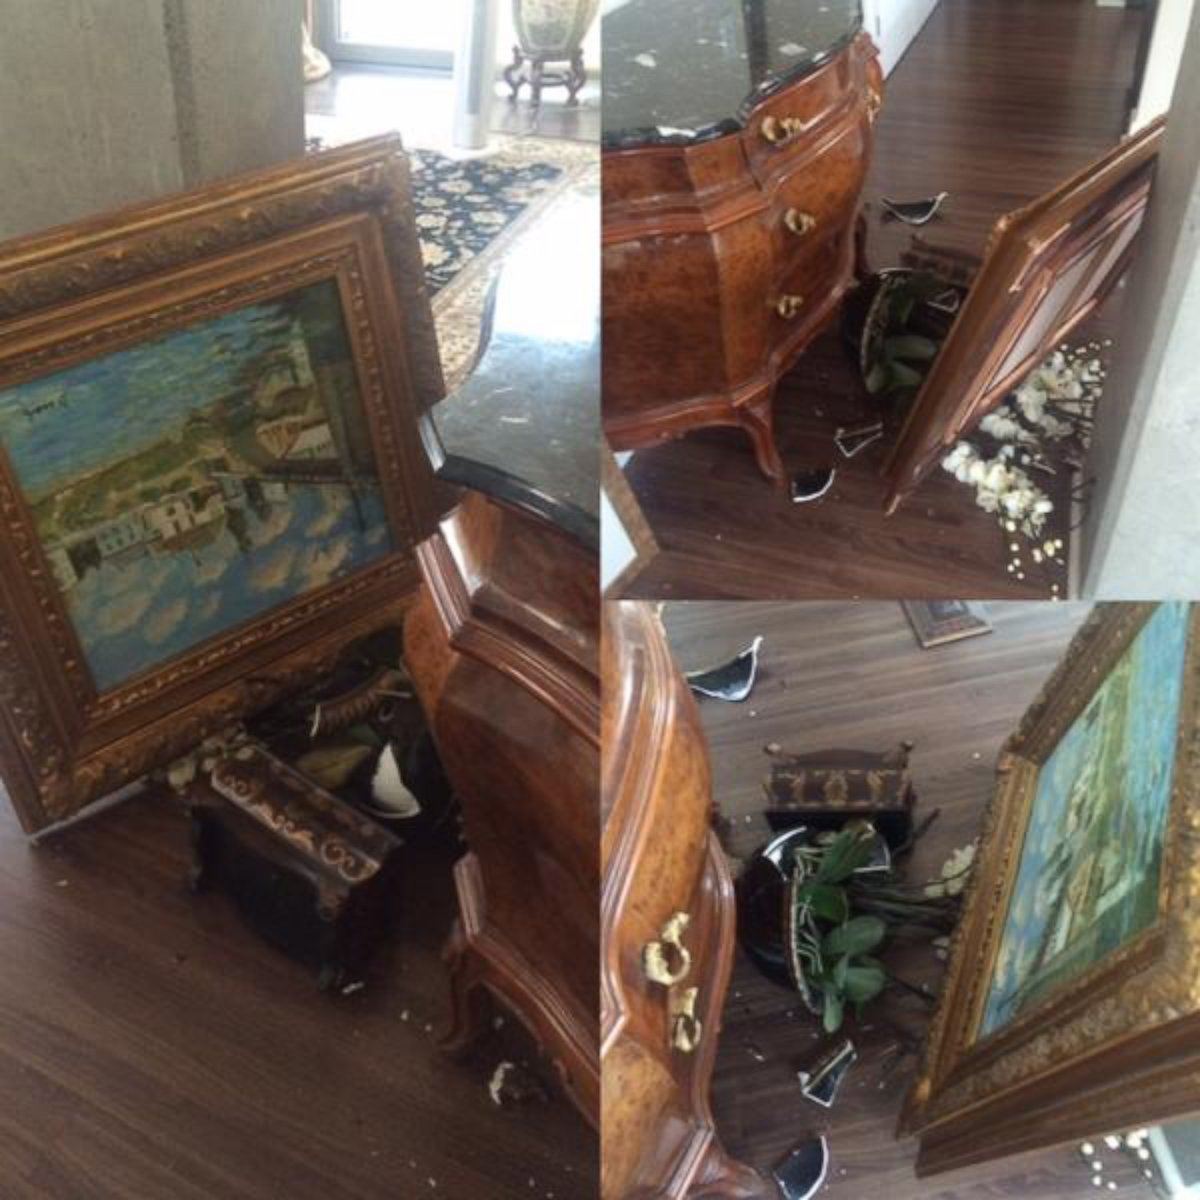 PHOTO: The quake caused flowers and a framed painting to tumble off this dresser at Liz Dawson's house.